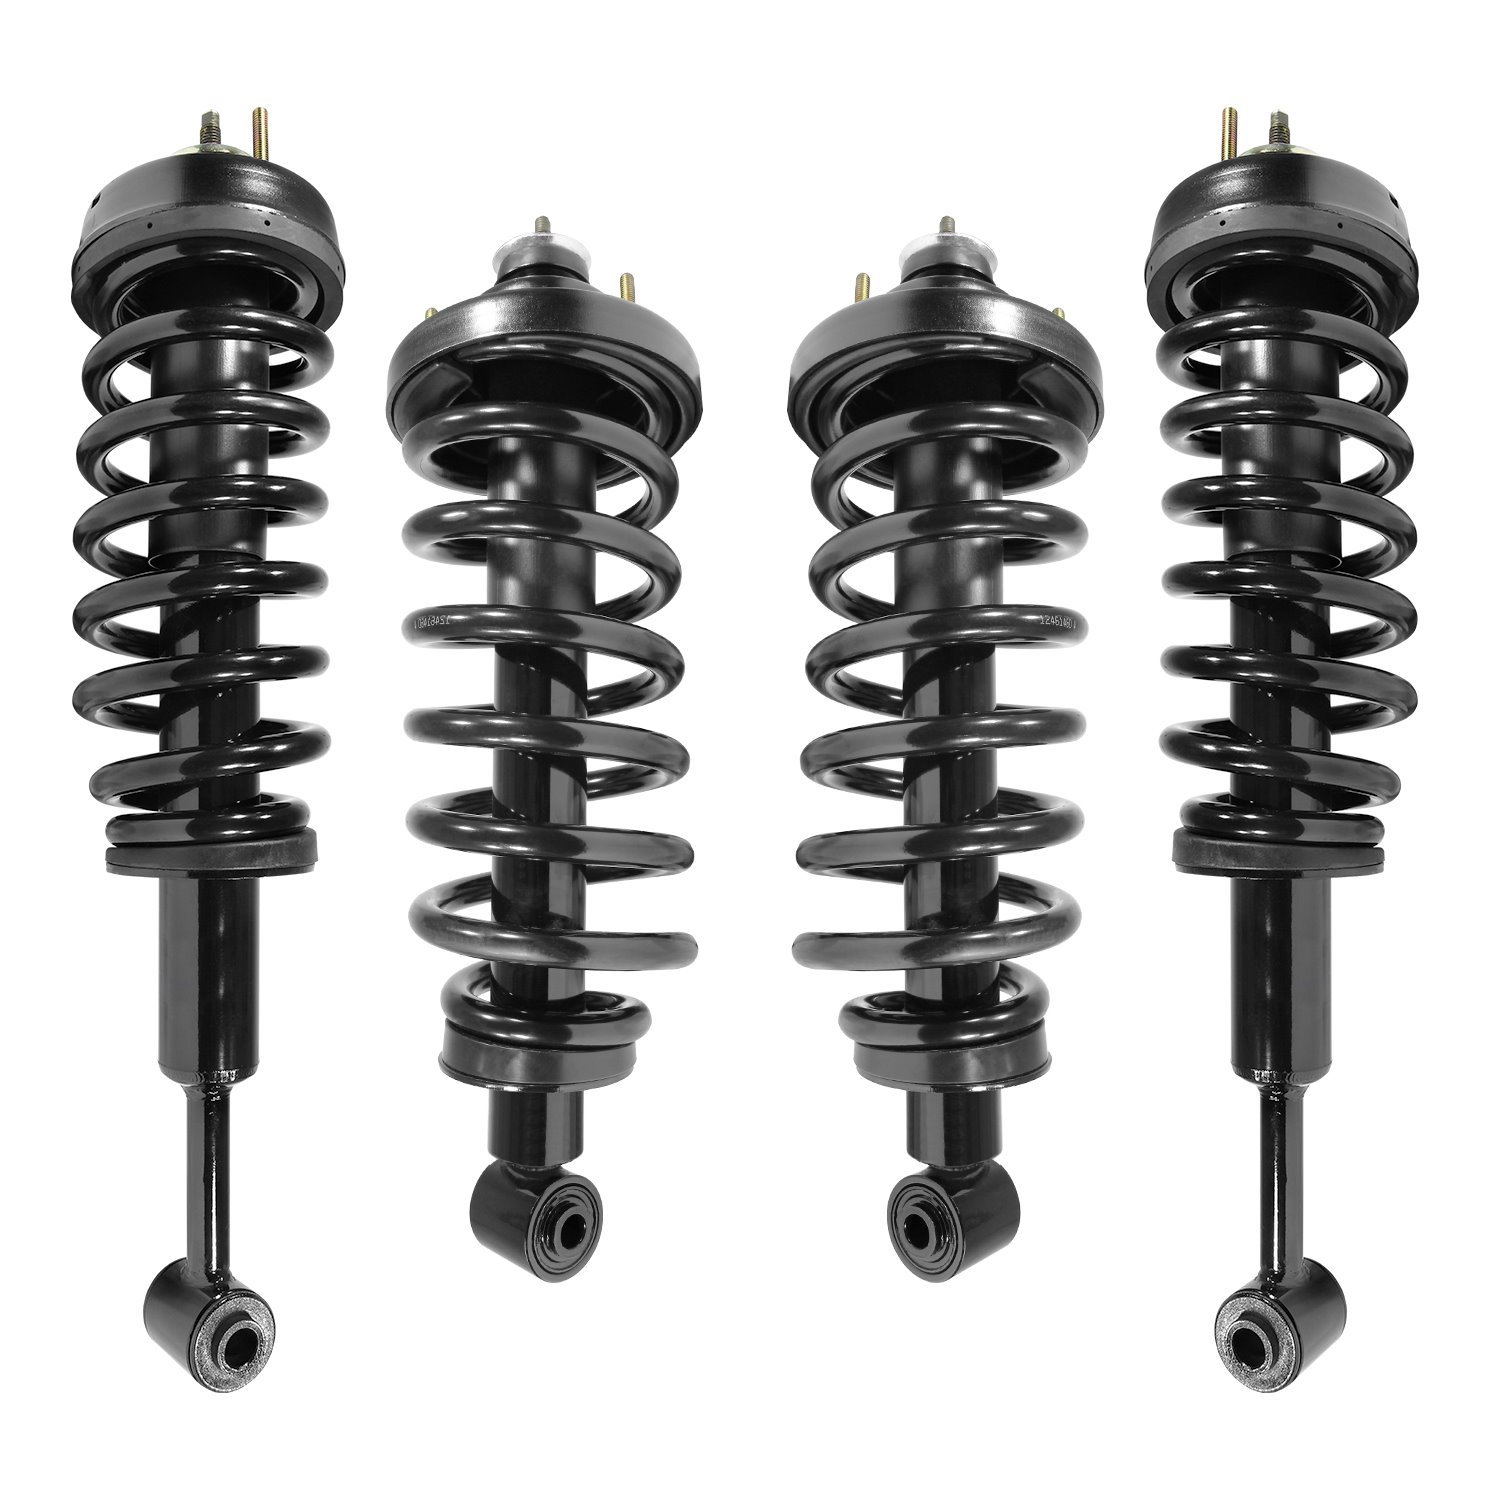 4-11890-15400-001 Front & Rear Suspension Strut & Coil Spring Assembly Kit Fits Select Ford Explorer, Mercury Mountaineer